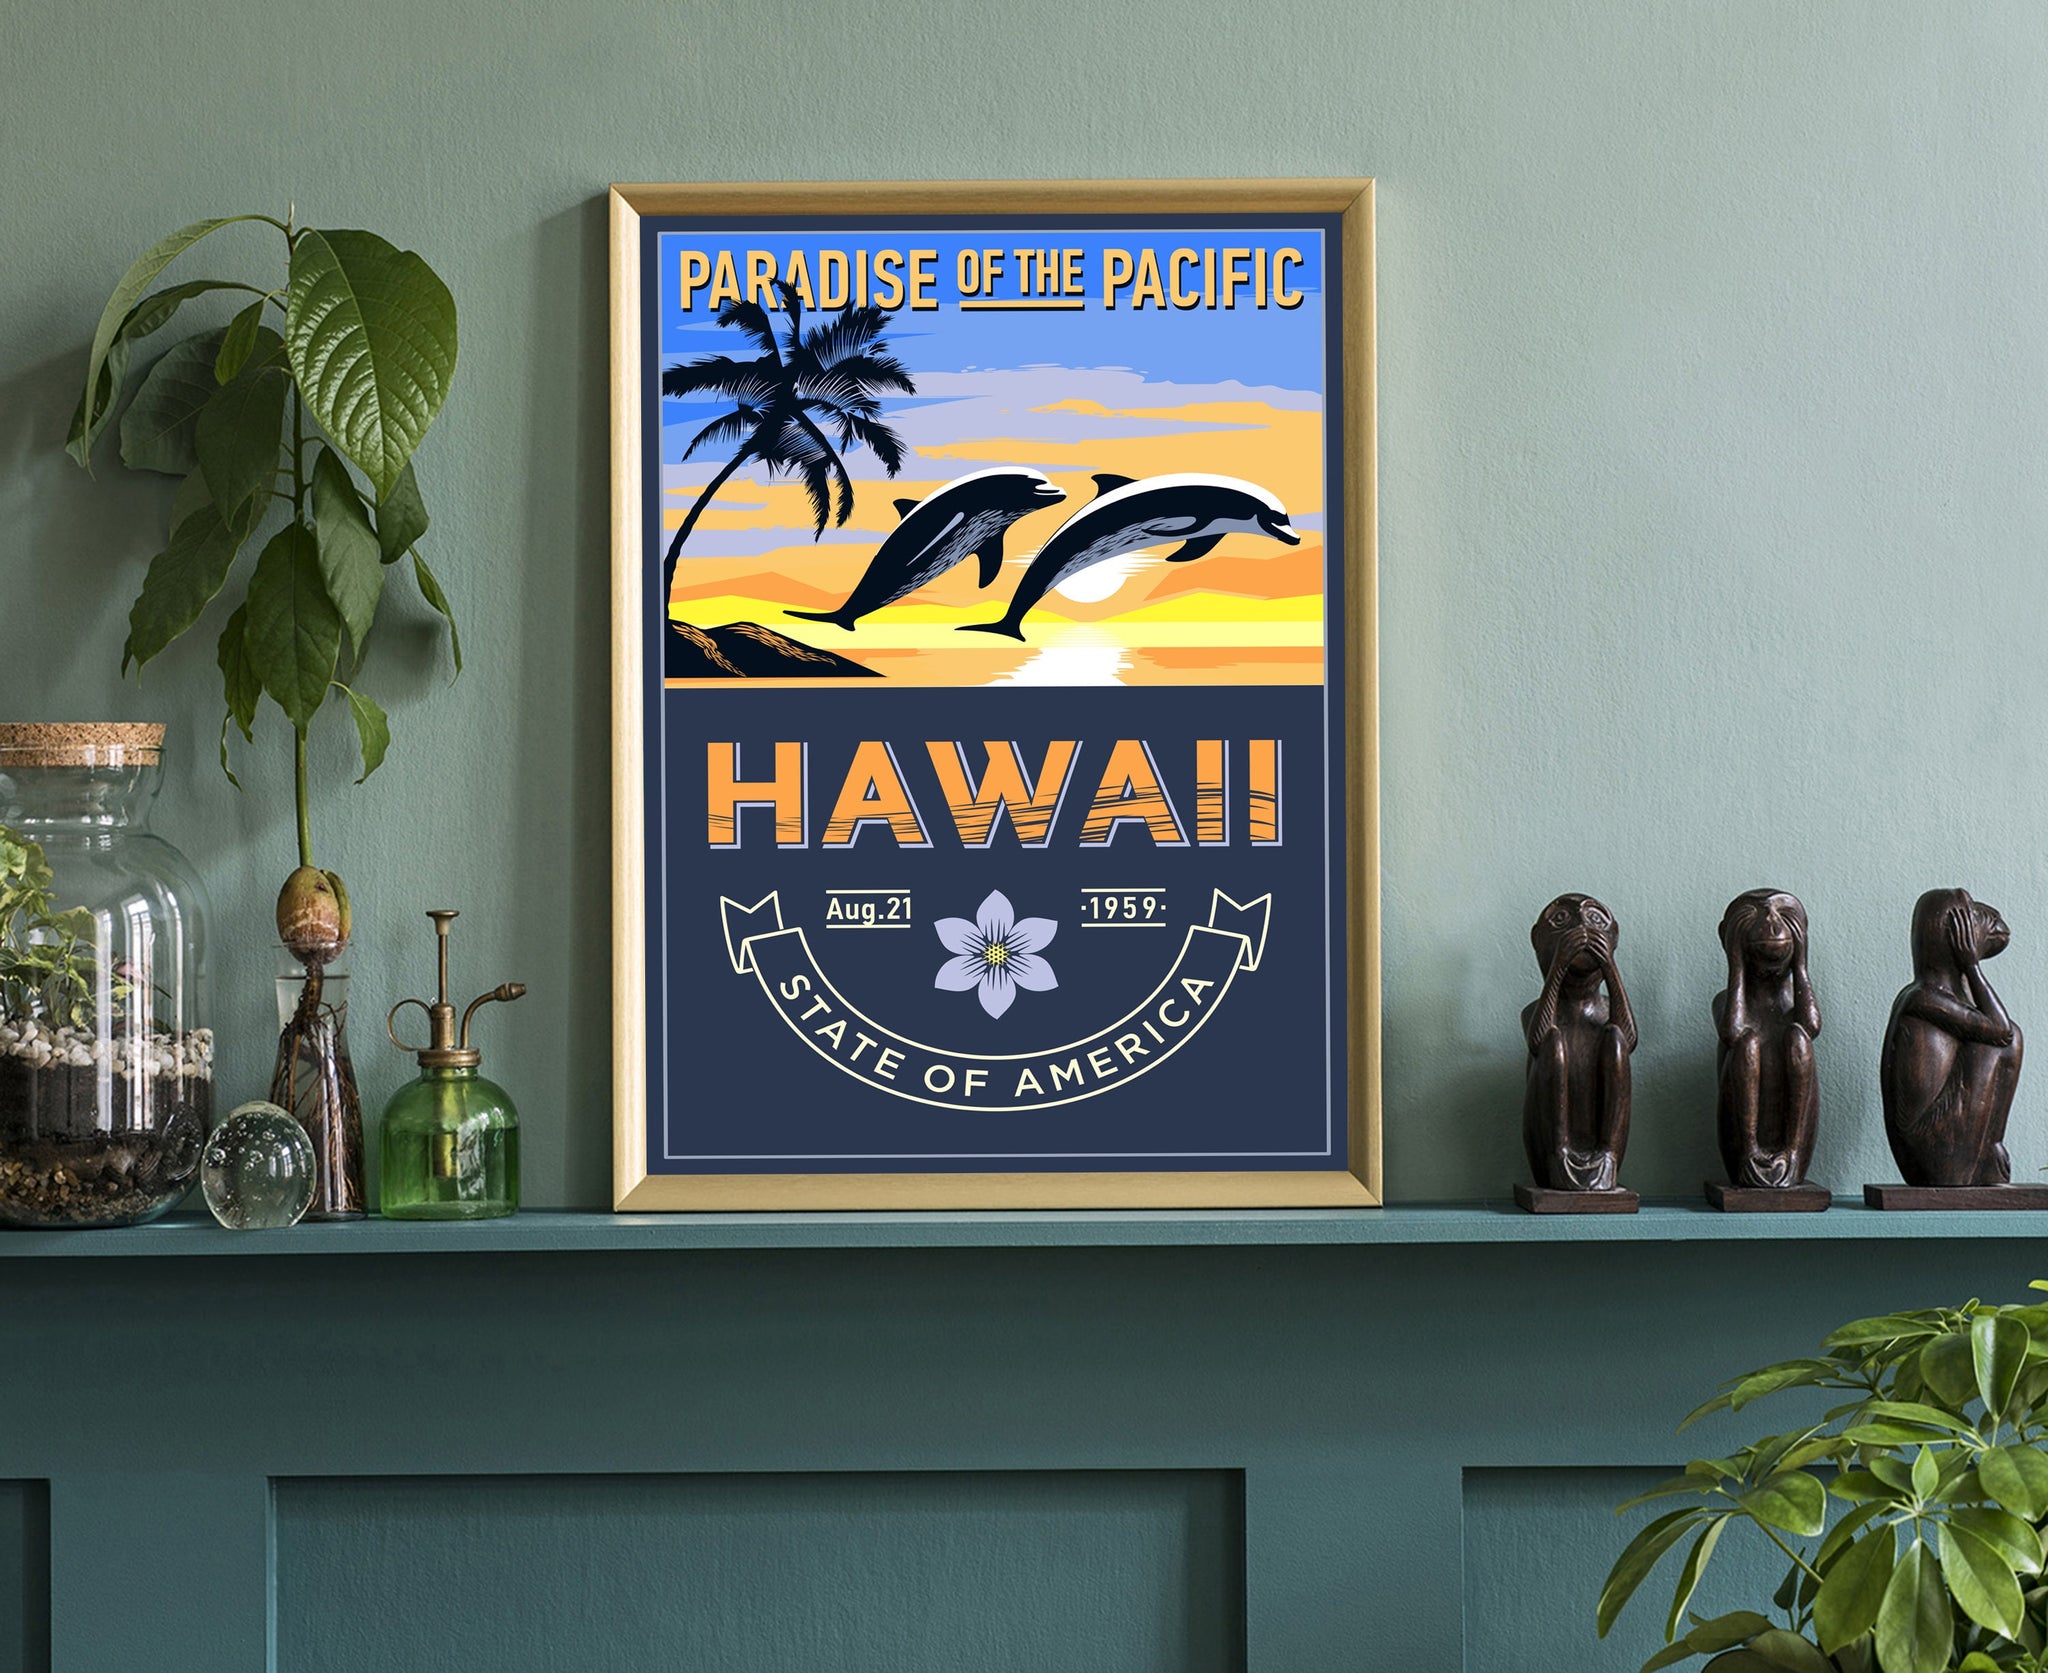 United States Hawaii State Poster, Hawaii Poster Print, Hawaii State Emblem Poster, Retro Travel State Poster, Home and Office Wall Art